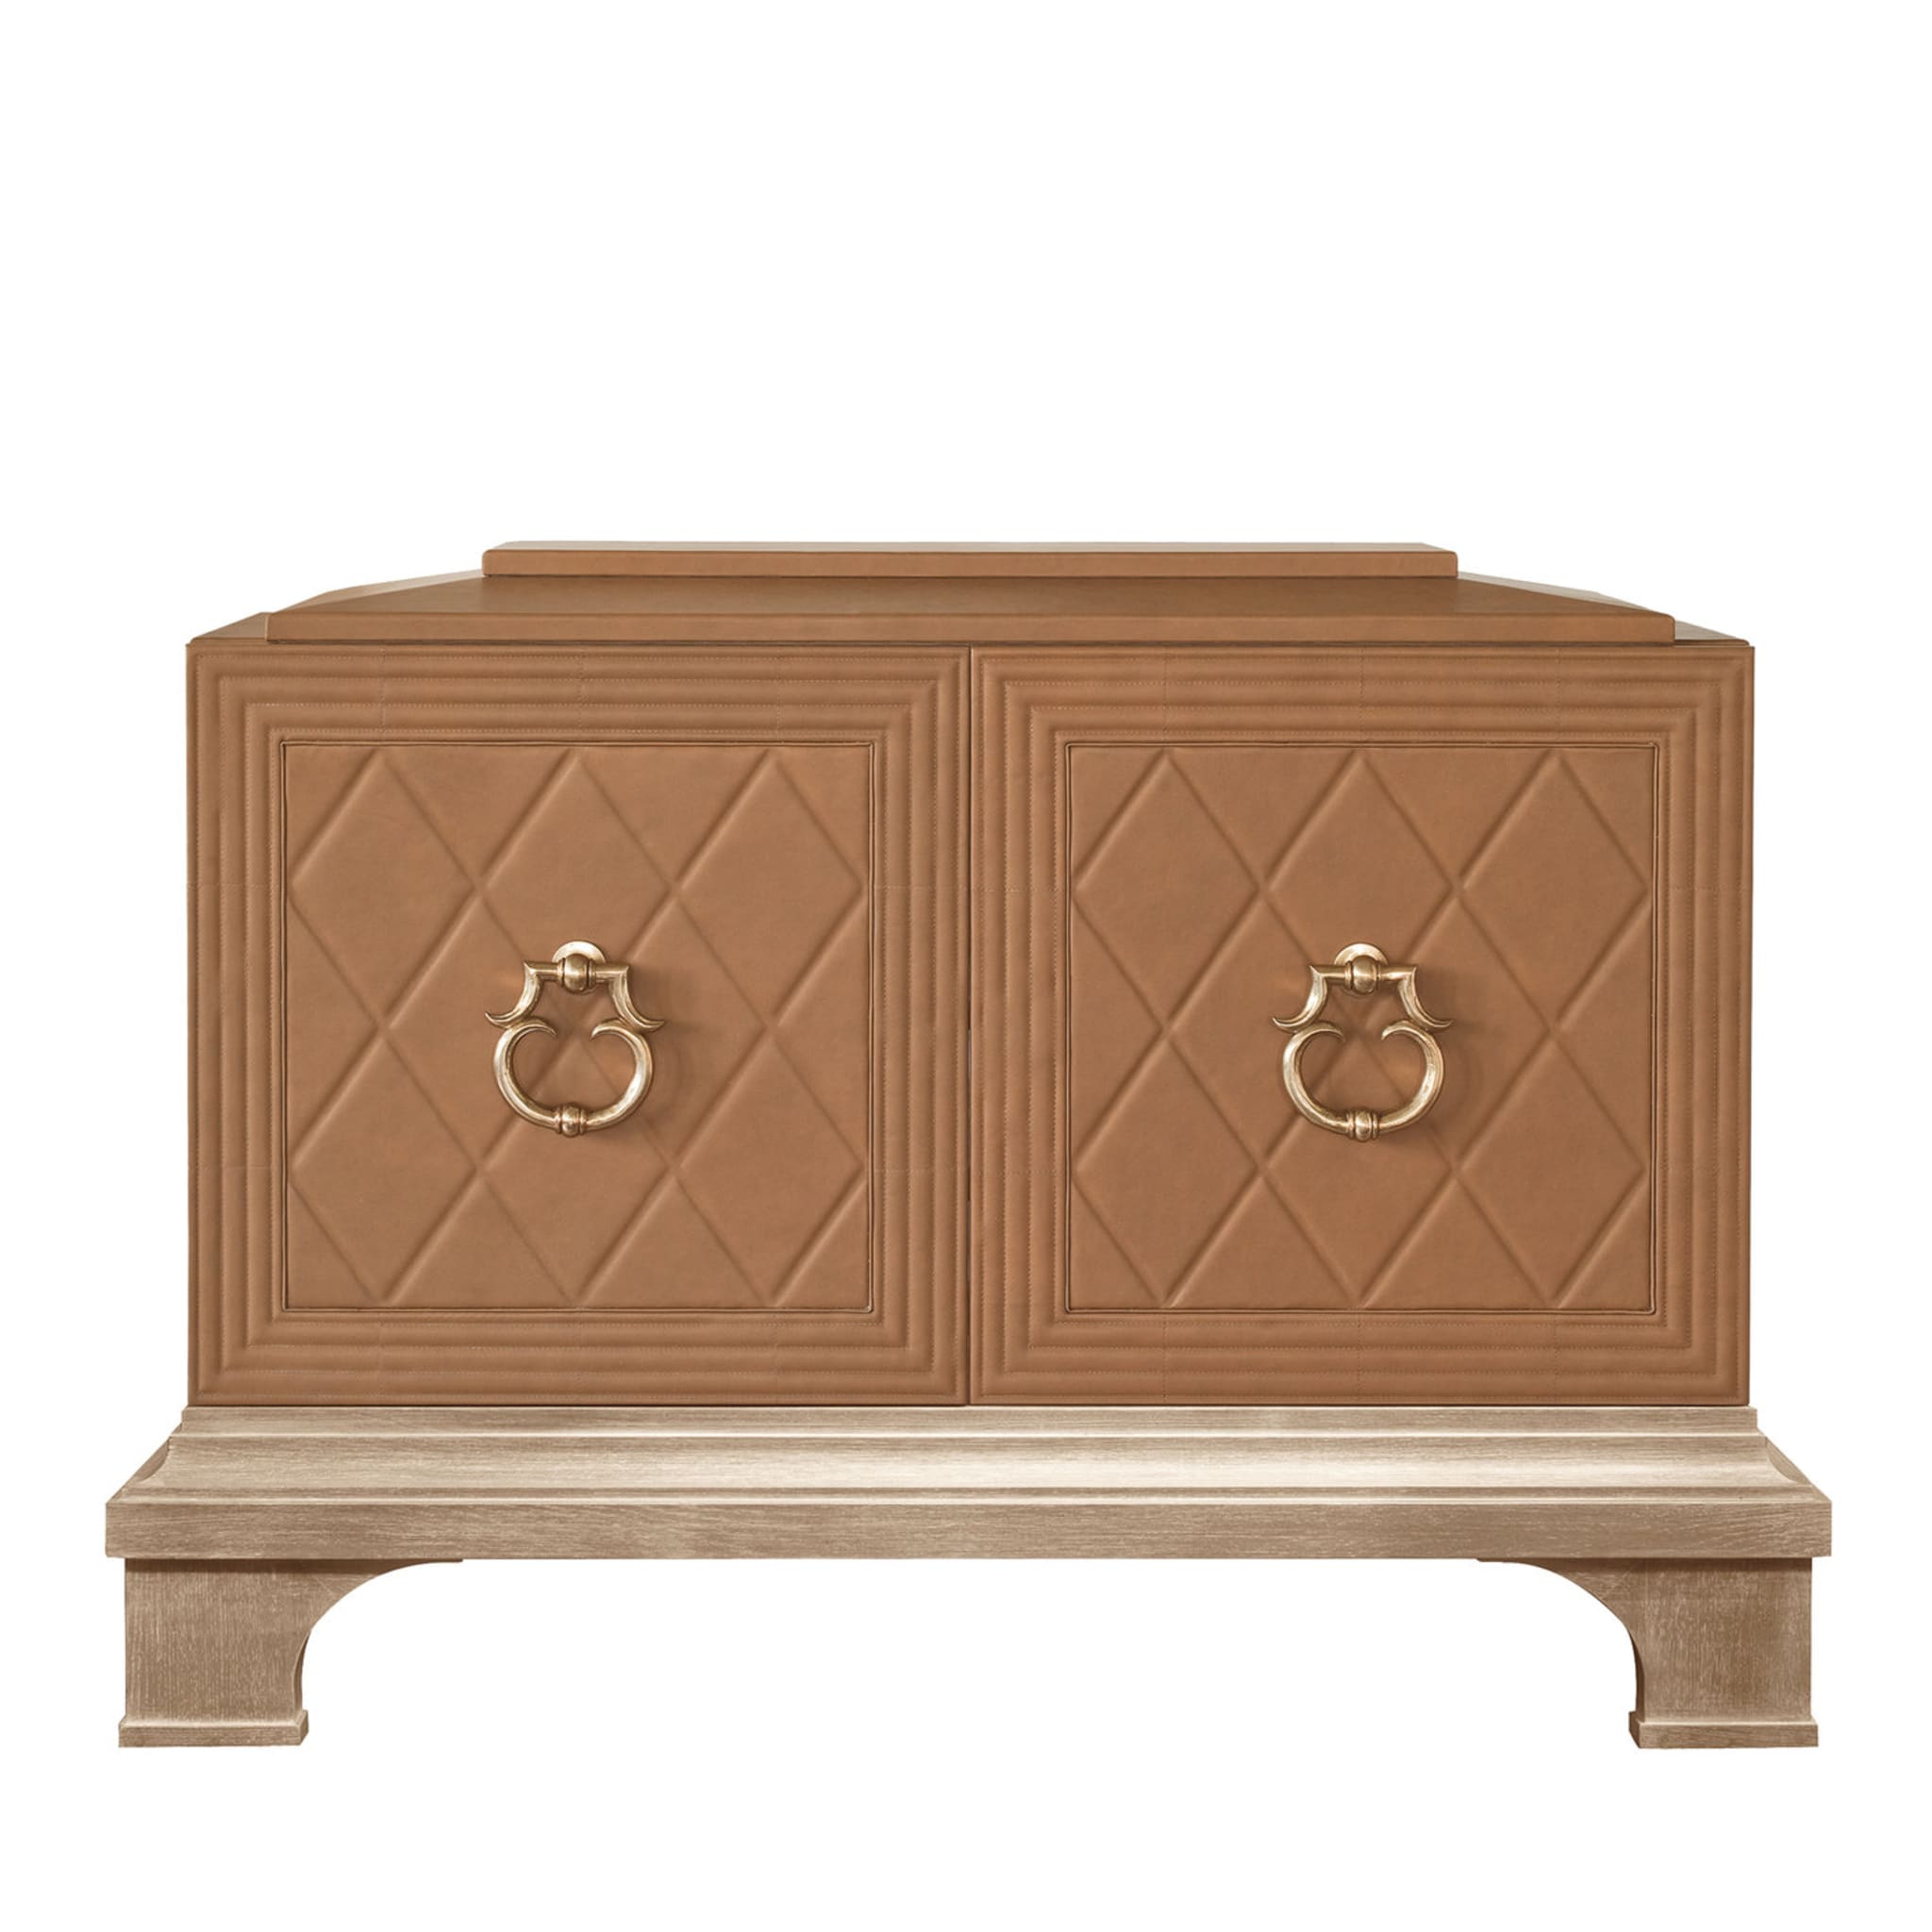 Faubourg Sideboard - Main view